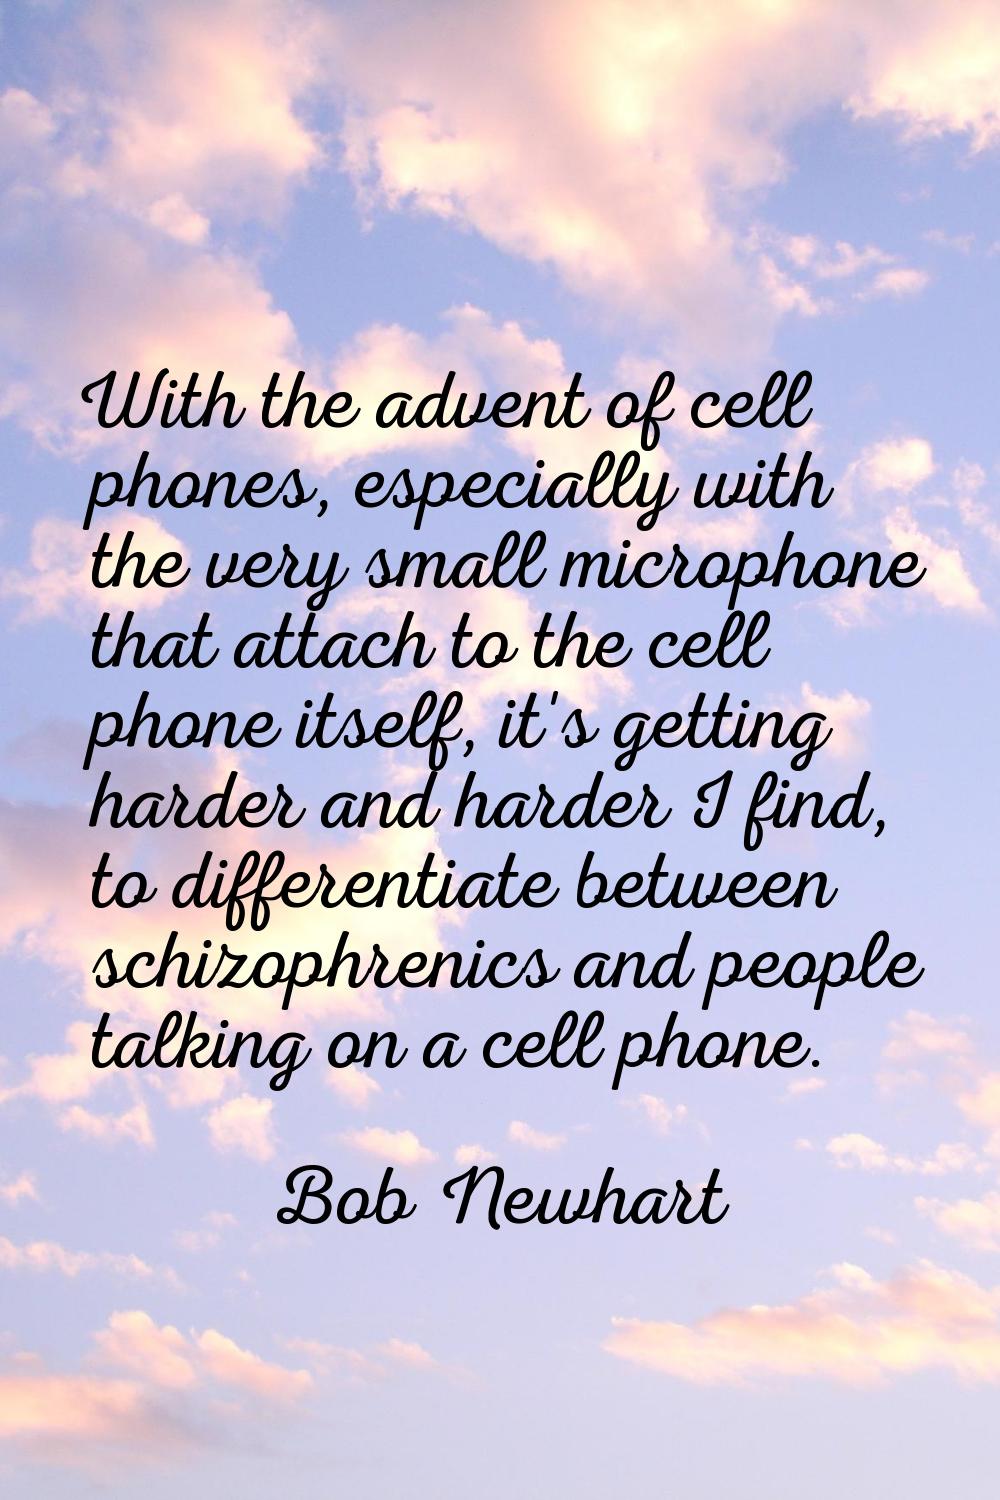 With the advent of cell phones, especially with the very small microphone that attach to the cell p